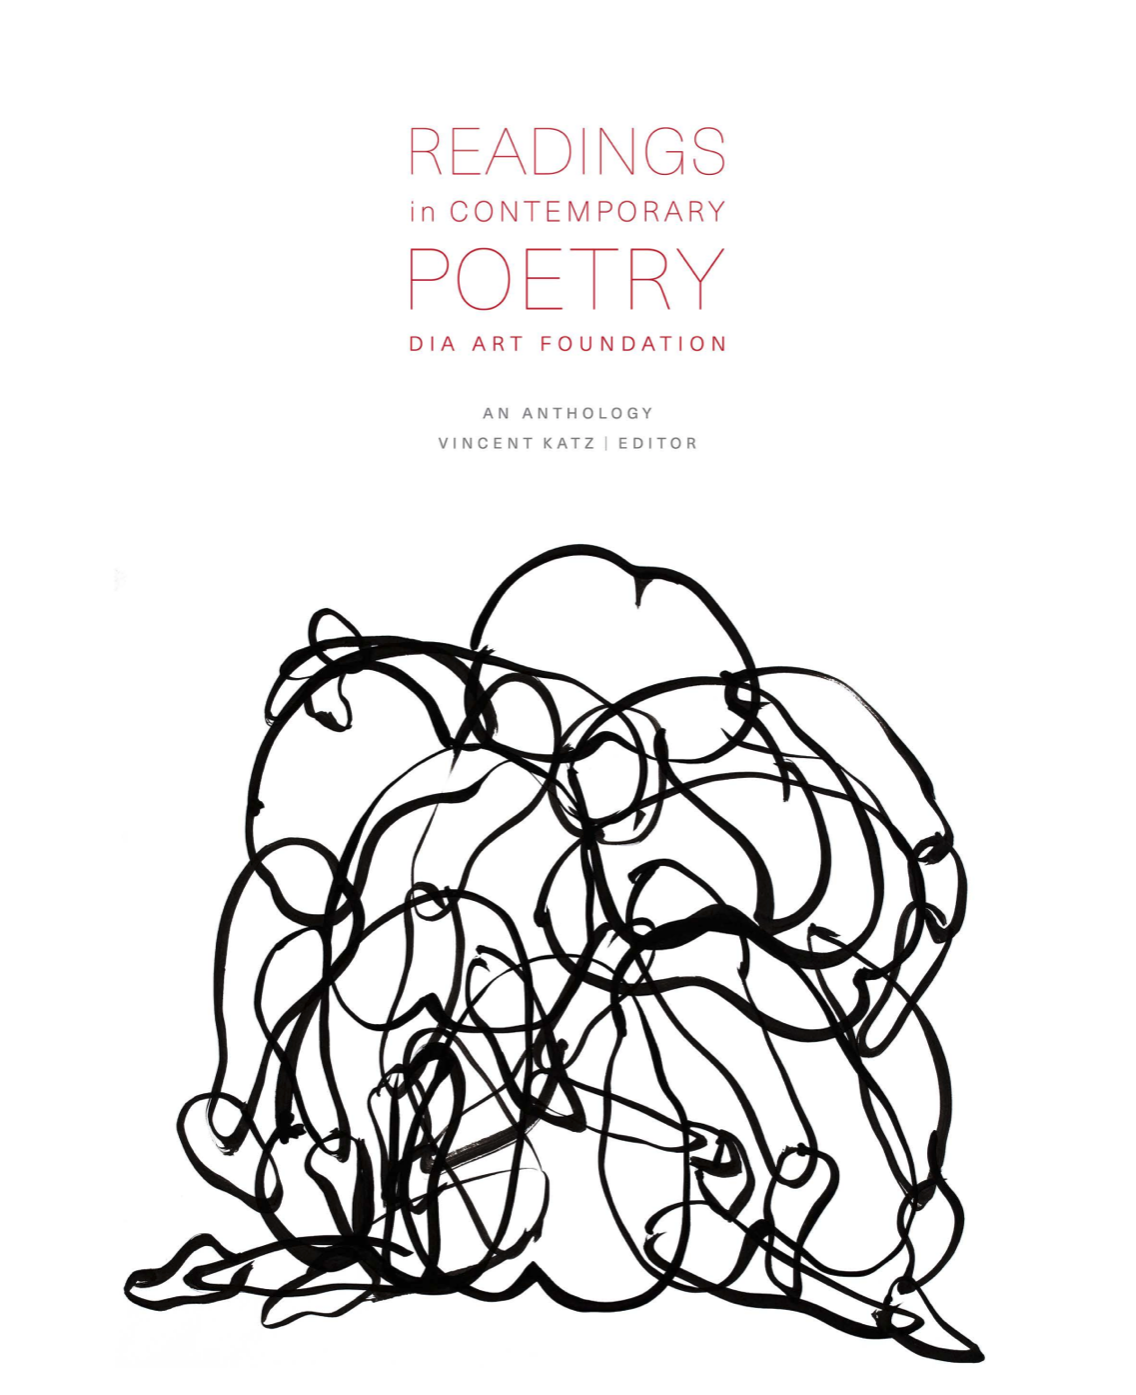 READINGS IN CONTEMPORARY POETRY: AN ANTHOLOGY